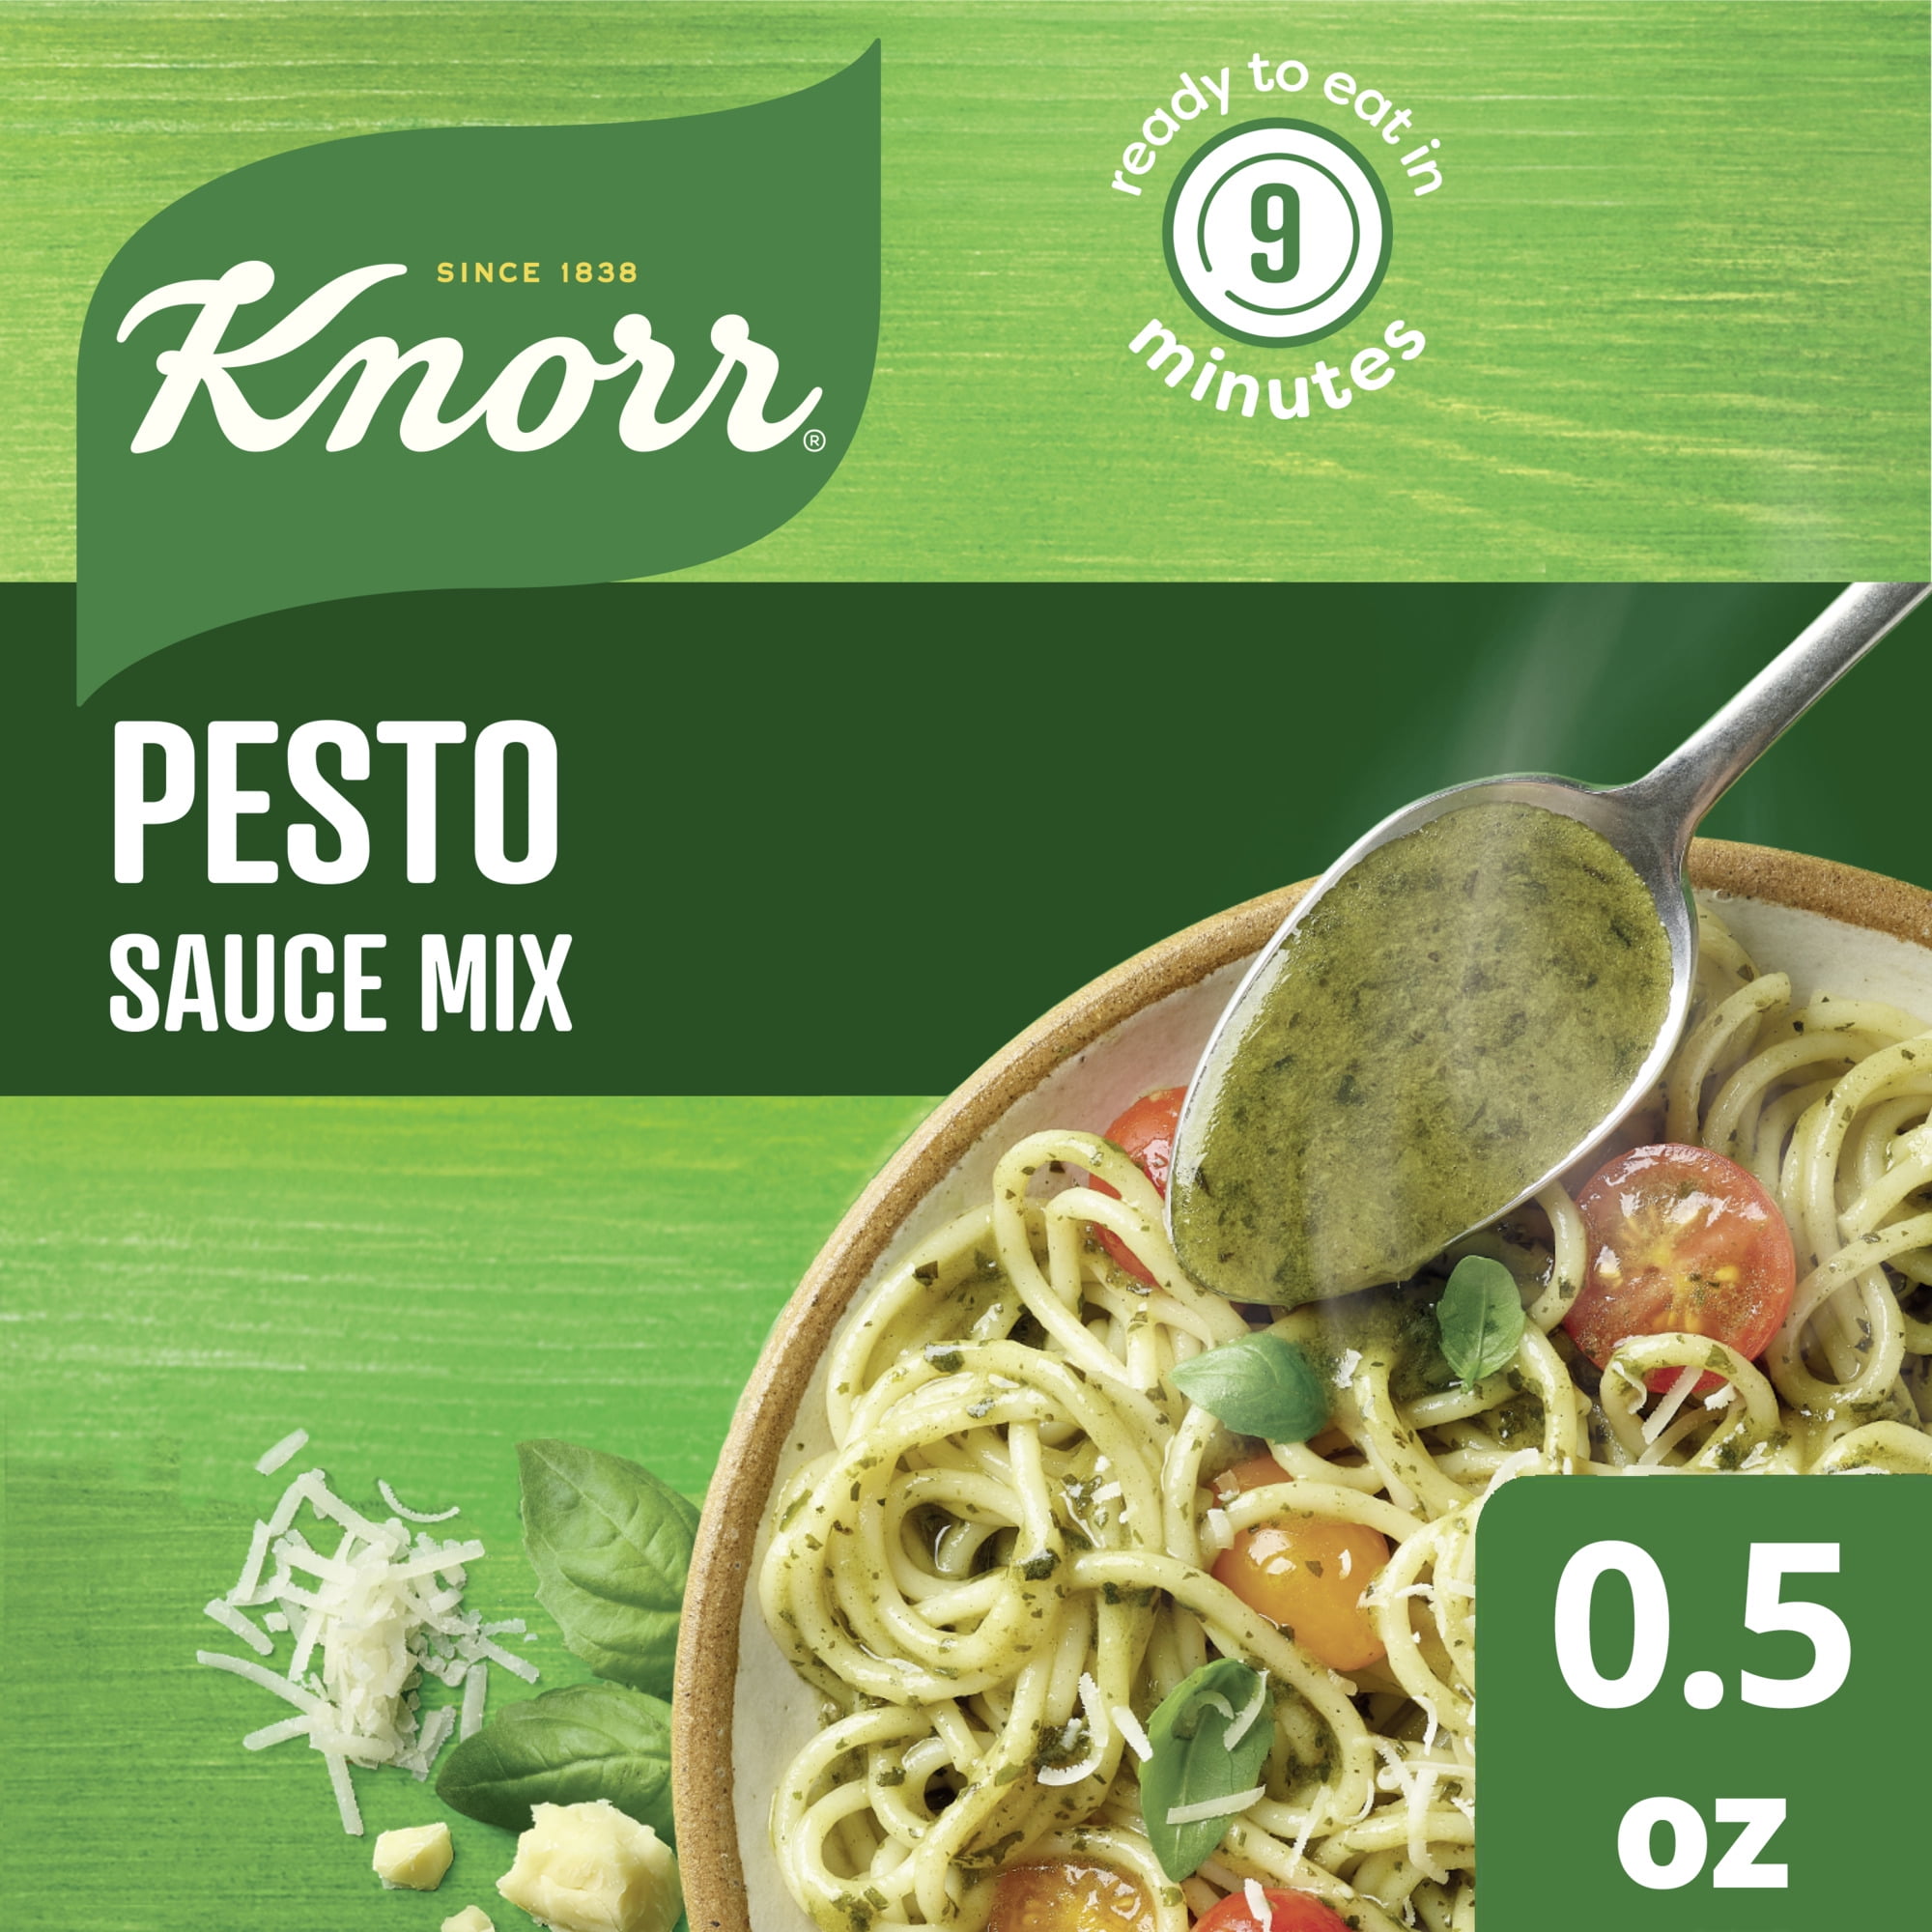 Knorr Sauce Mix Pesto Pasta Sauce, Cooks in 9 Minutes, No Artificial Flavors, No Added MSG, 0.5 oz